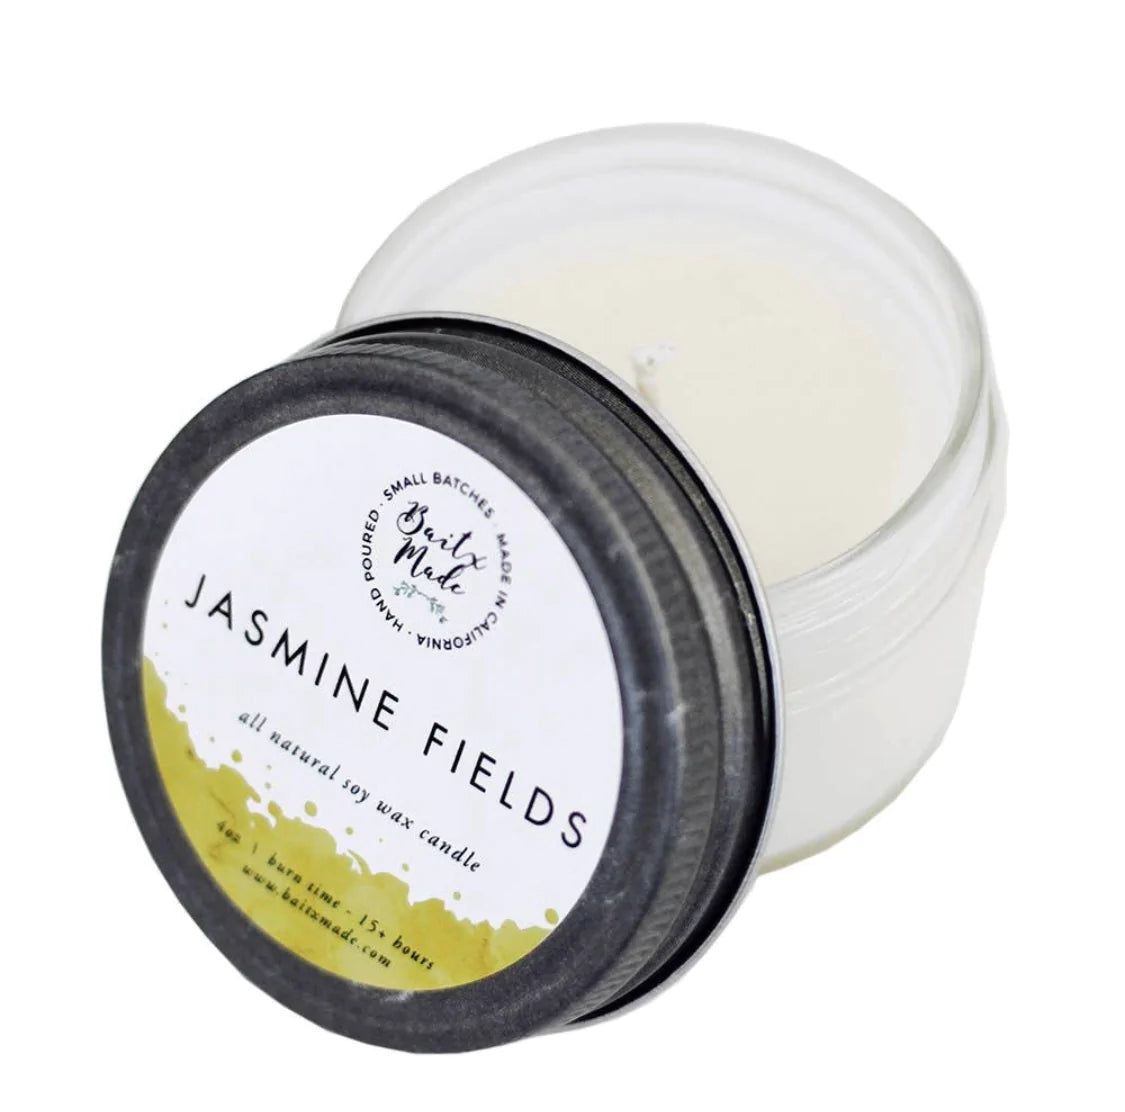 Jasmine fields candle, candle with jasmine aroma, soy wax candle, gift ideas, natural candle